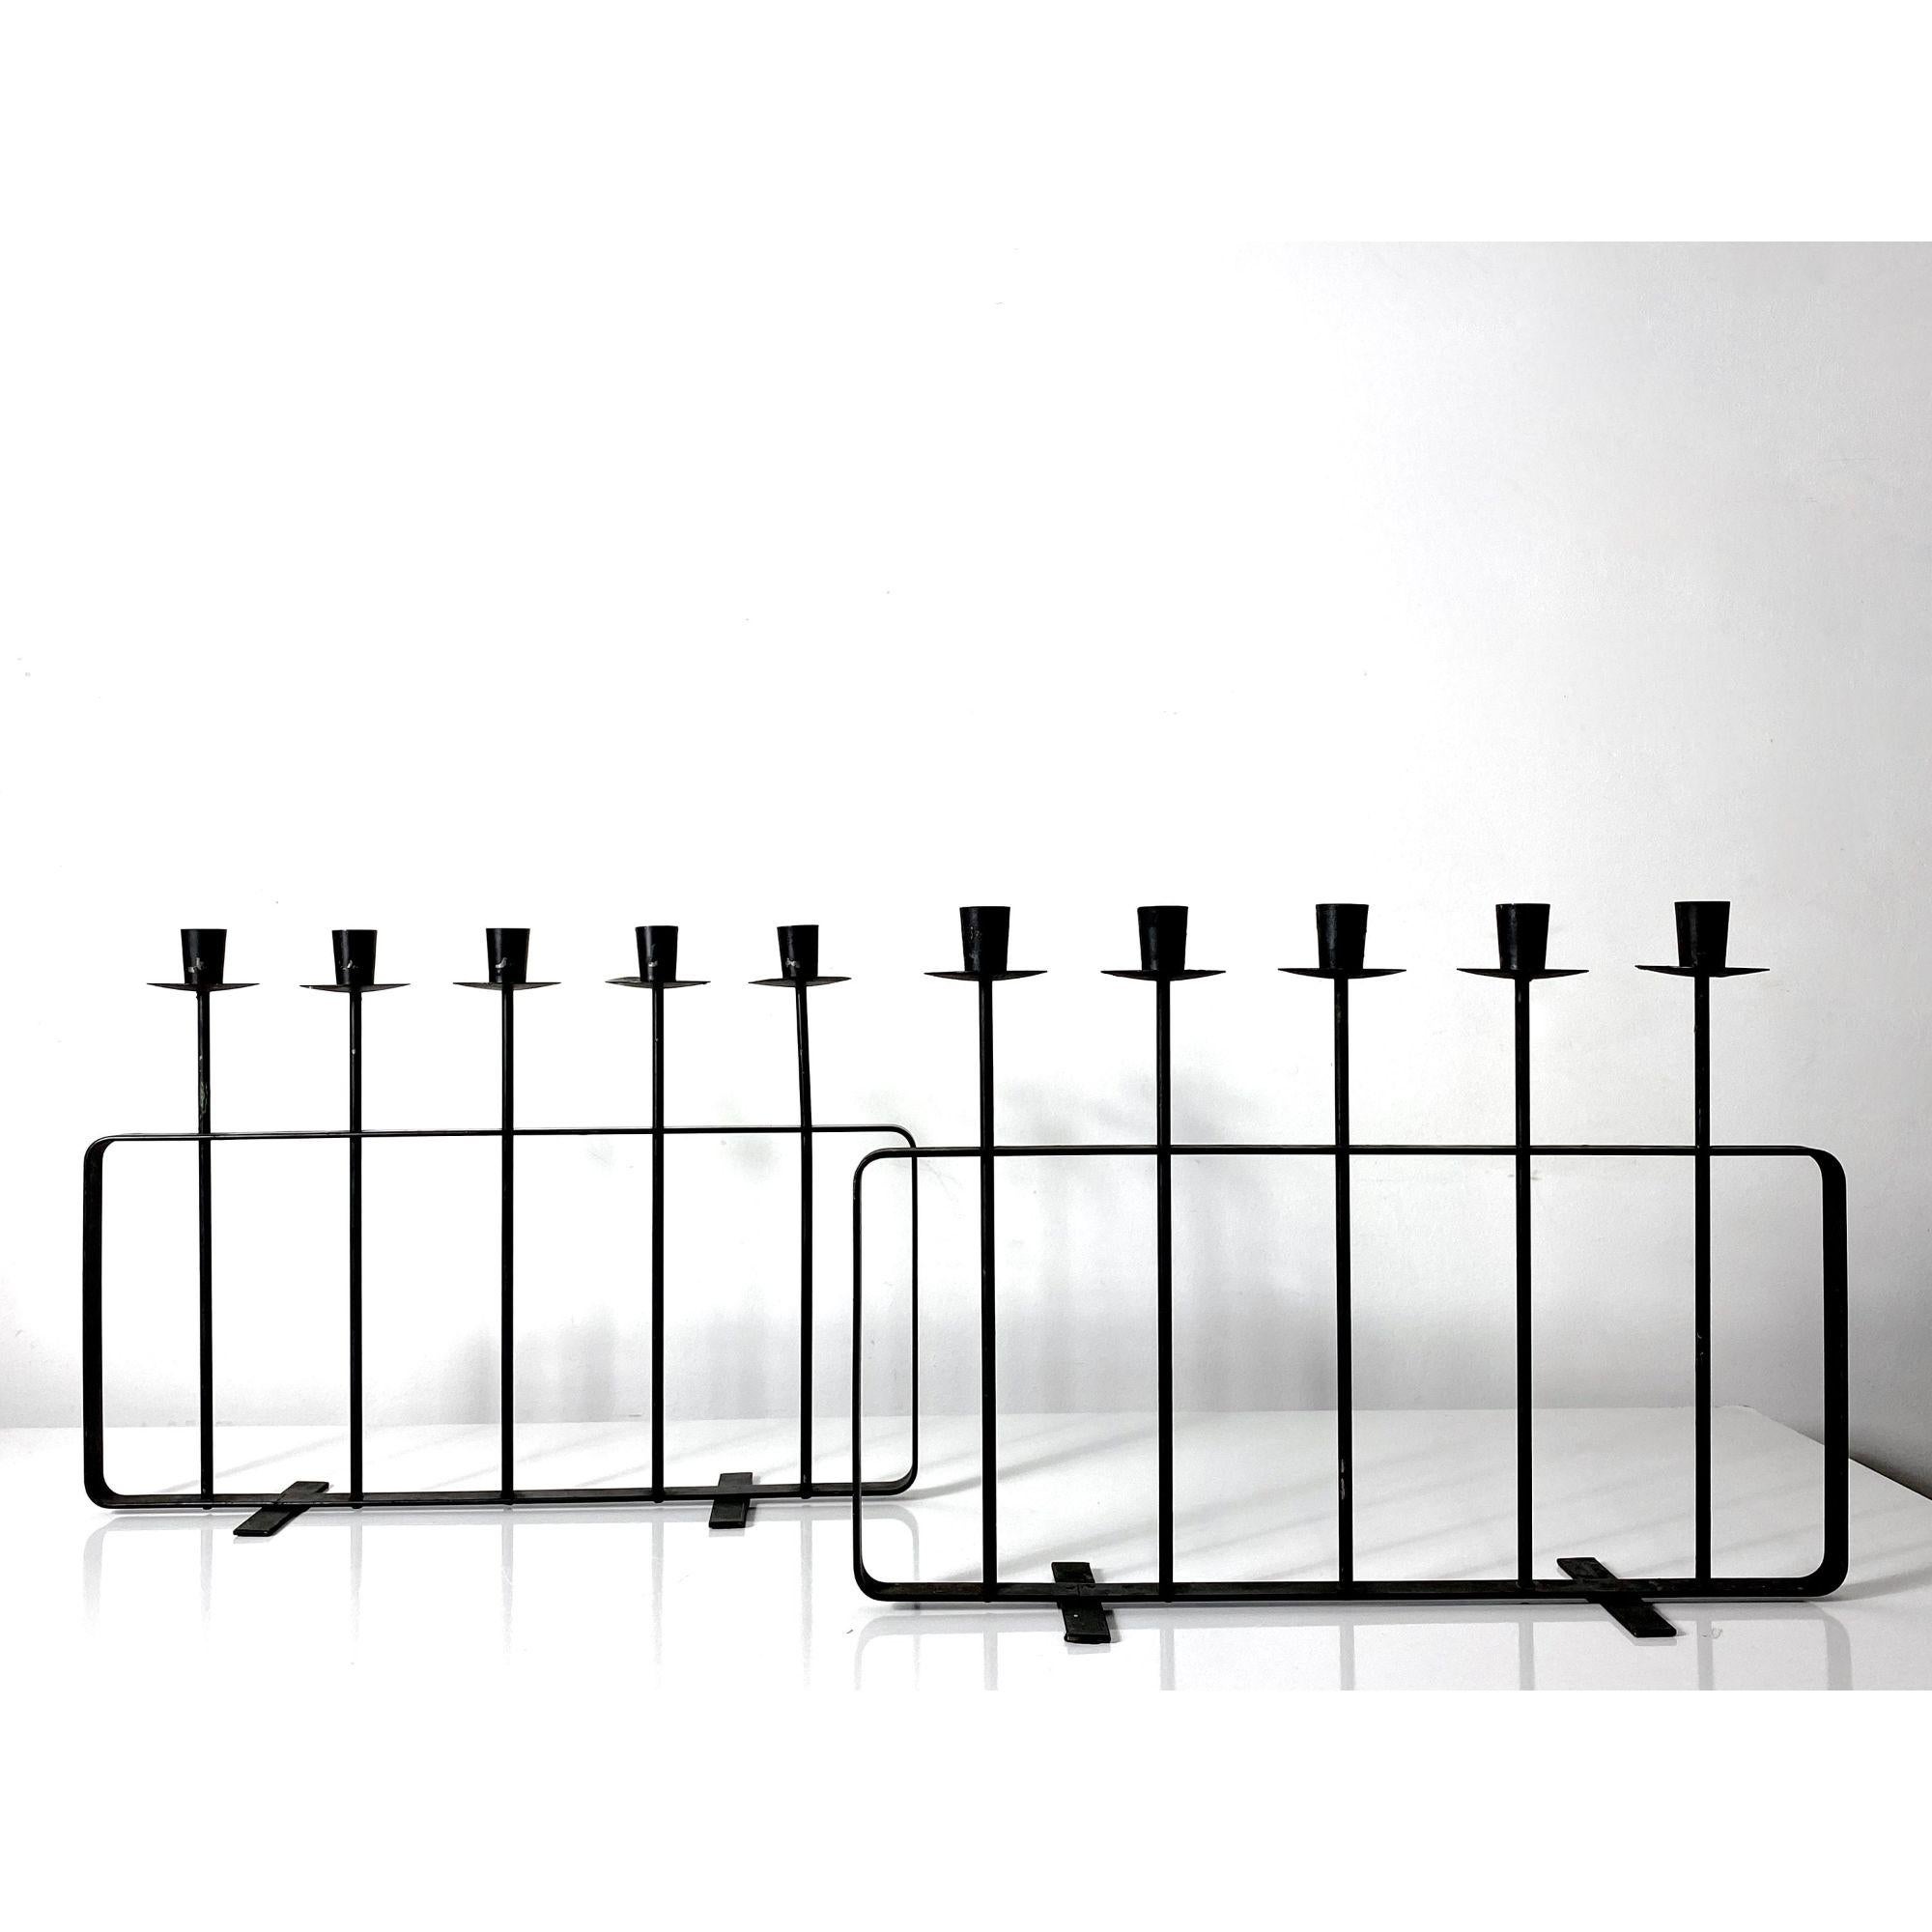 Richard Galef Ravenware Iron Candelabras 1950s

Two available
Hard to find Richard Galef for Ravenware model D35 Candelabra circa 1950s
Black iron minimalist design

Additional Information:
Materials: Iron
Dimensions: 4